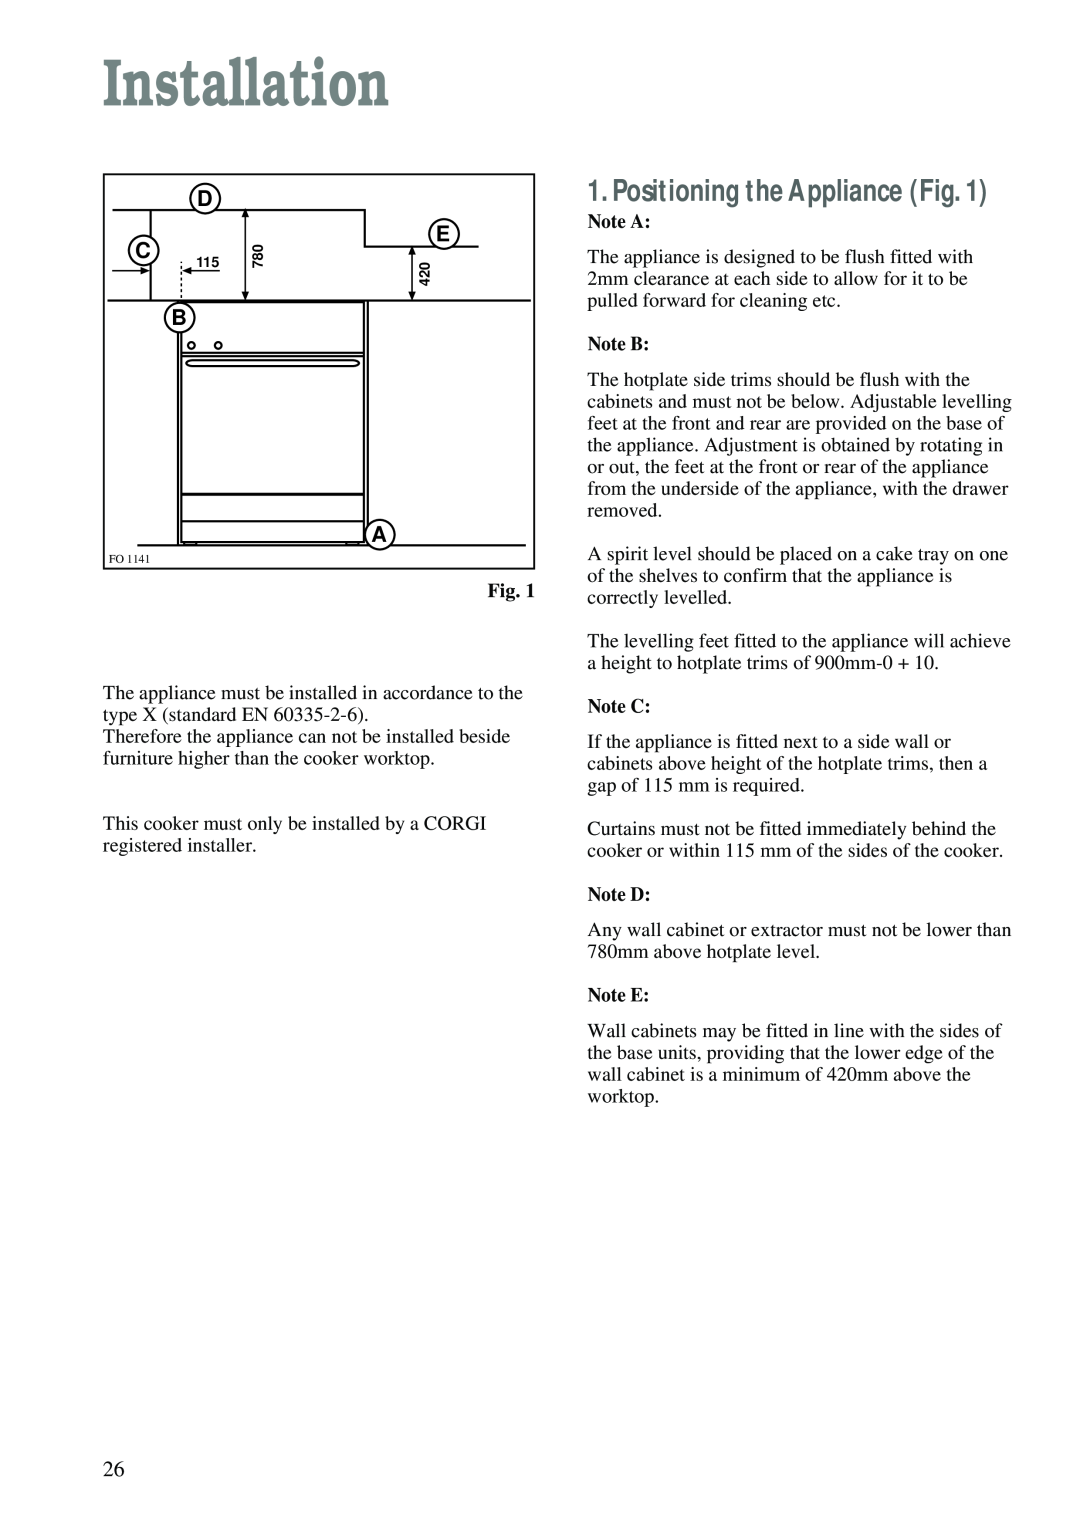 Zanussi ZCM 620 X manual Positioning the Appliance Fig, Note A, Note B, Note C, Note D, Note E, Installation 